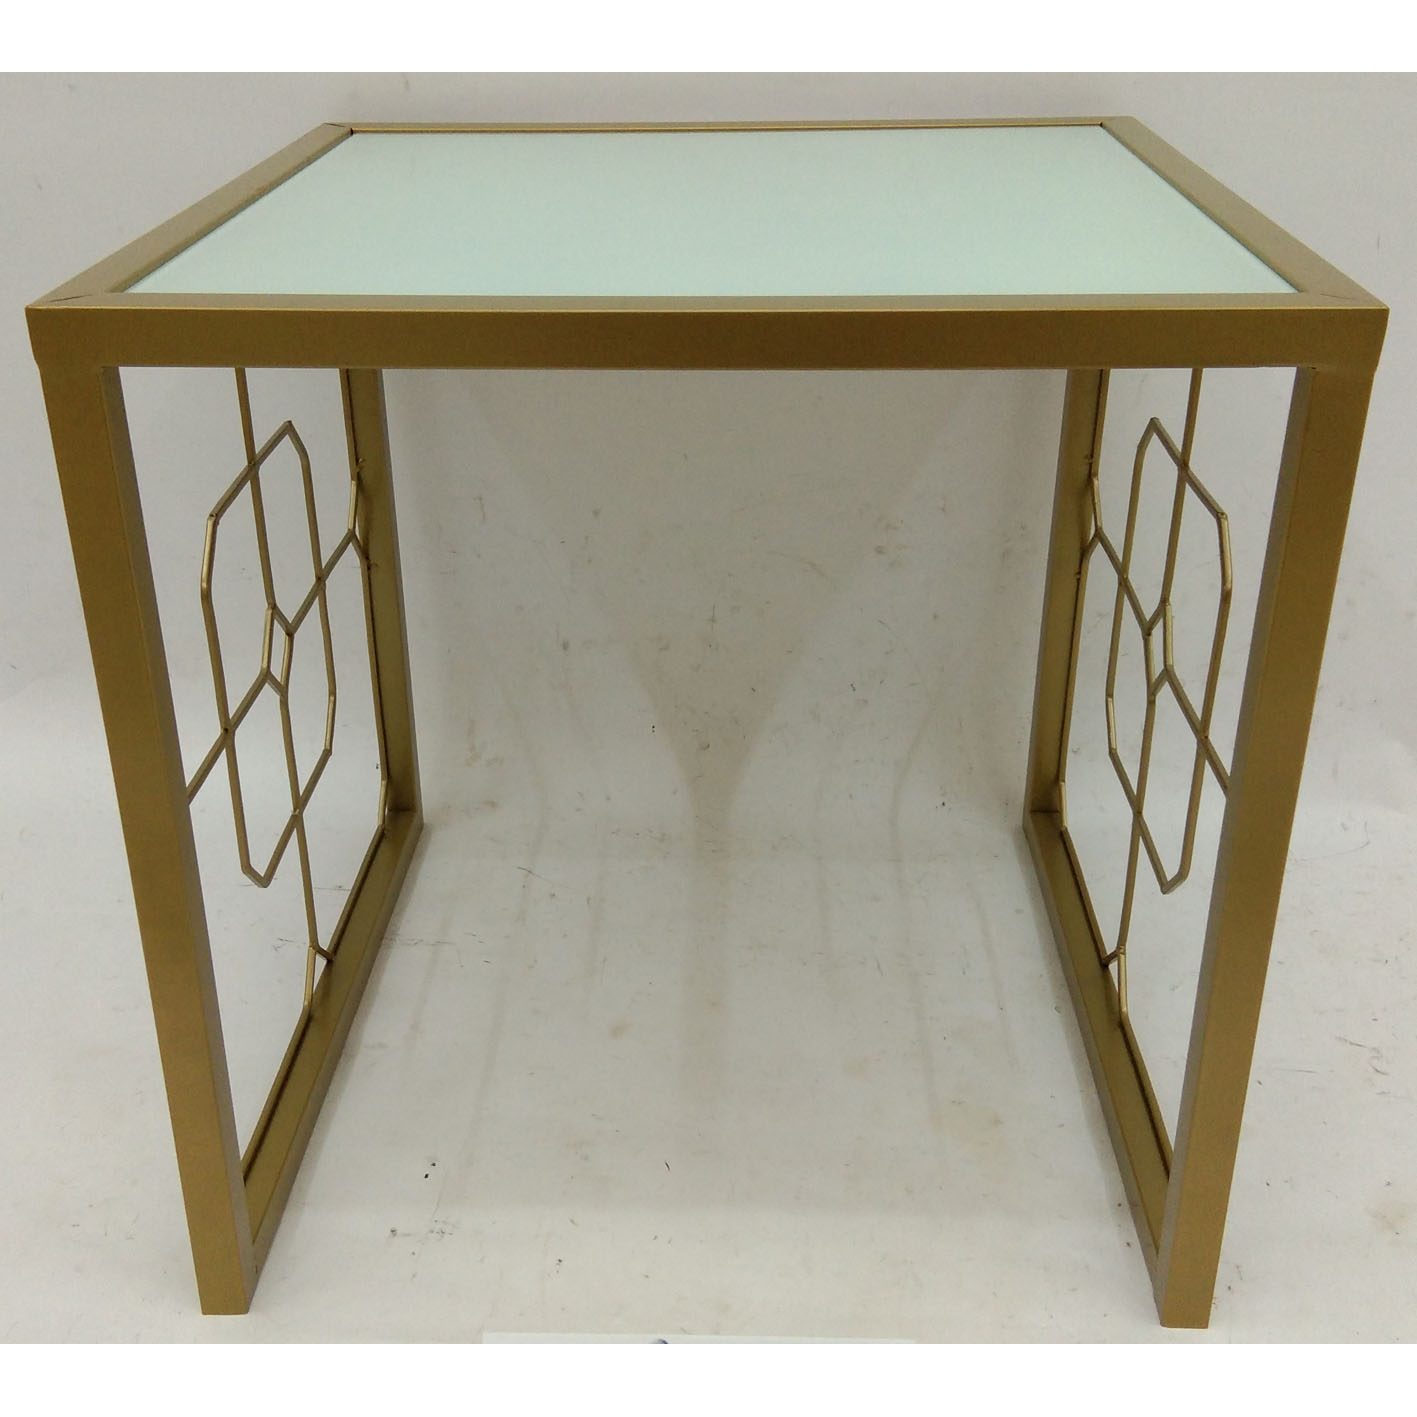 Gold square metal side table with white glass top and geometric metal side decor